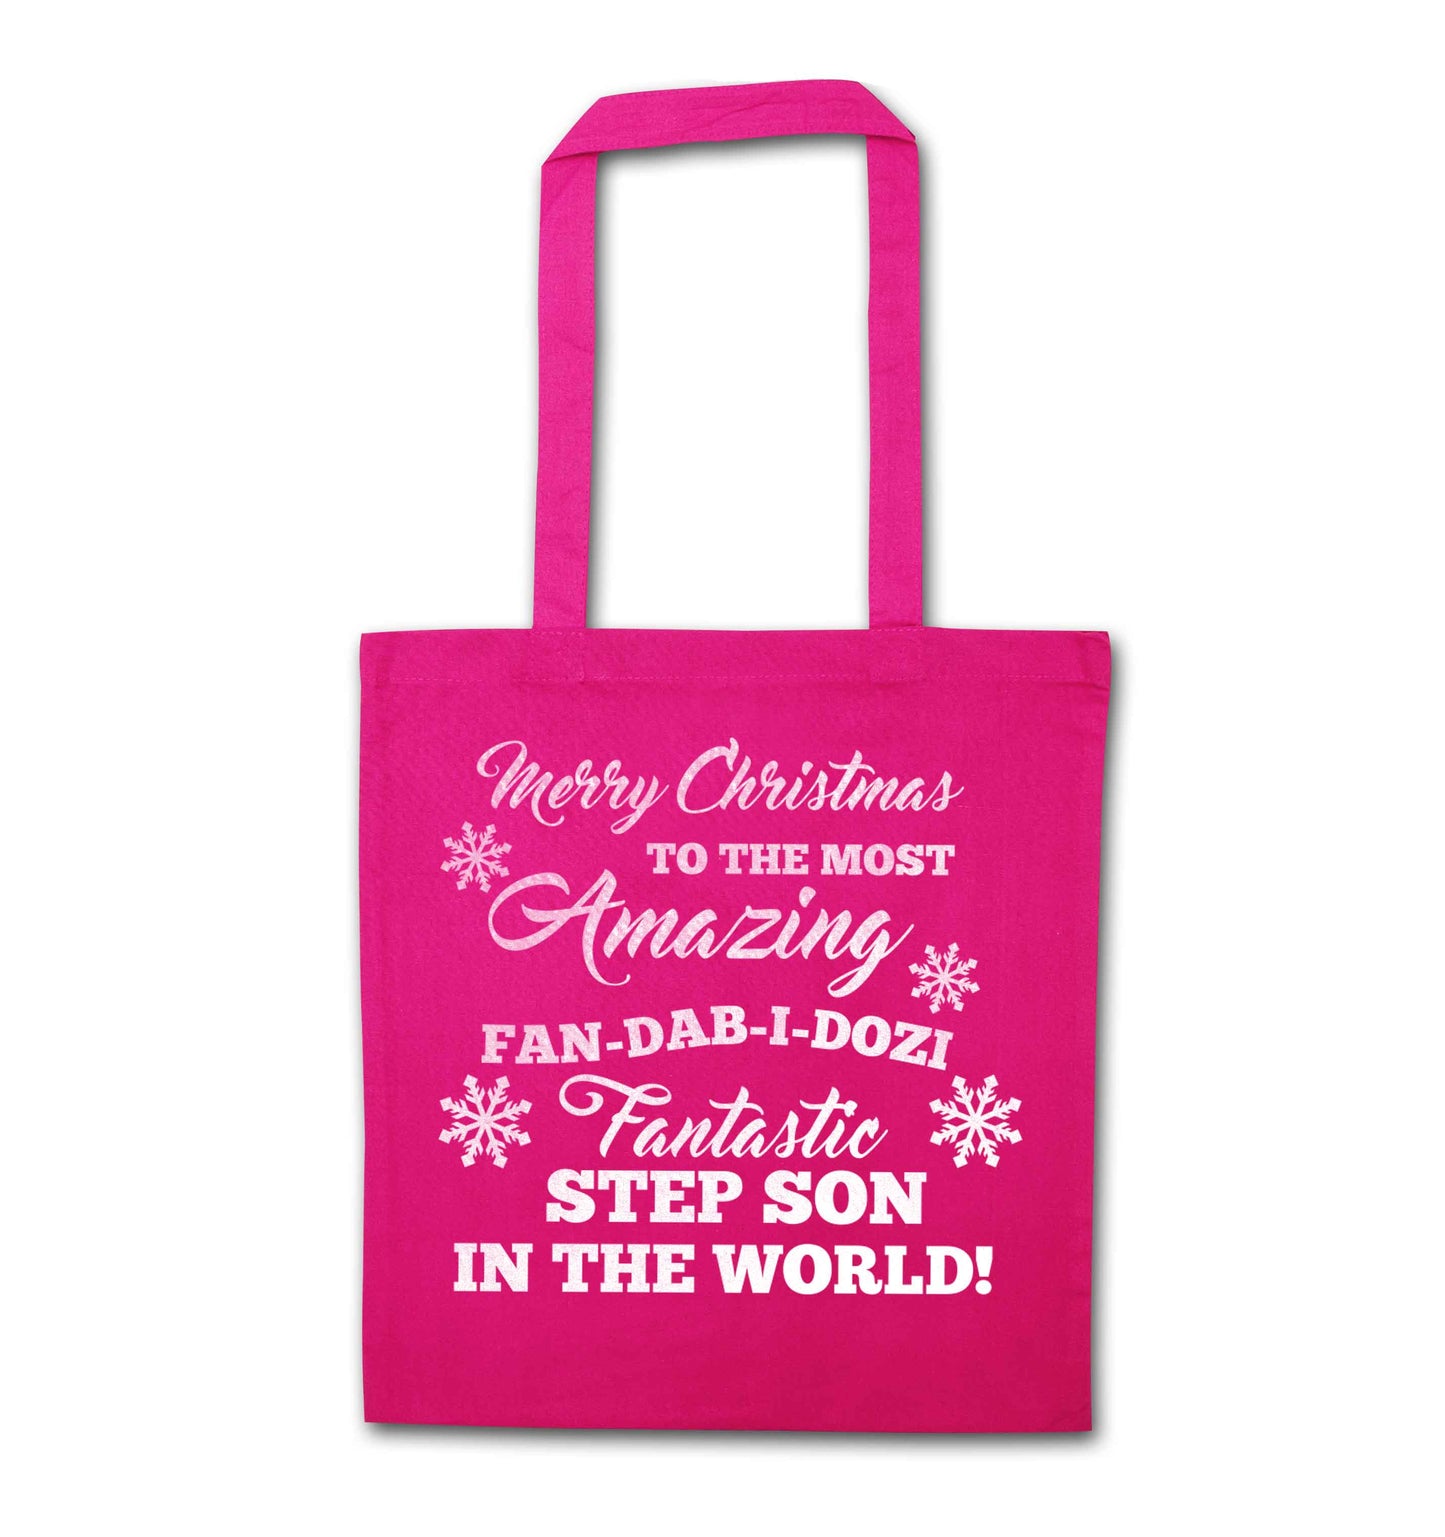 Merry Christmas to the most amazing fan-dab-i-dozi fantasic Step Son in the world pink tote bag